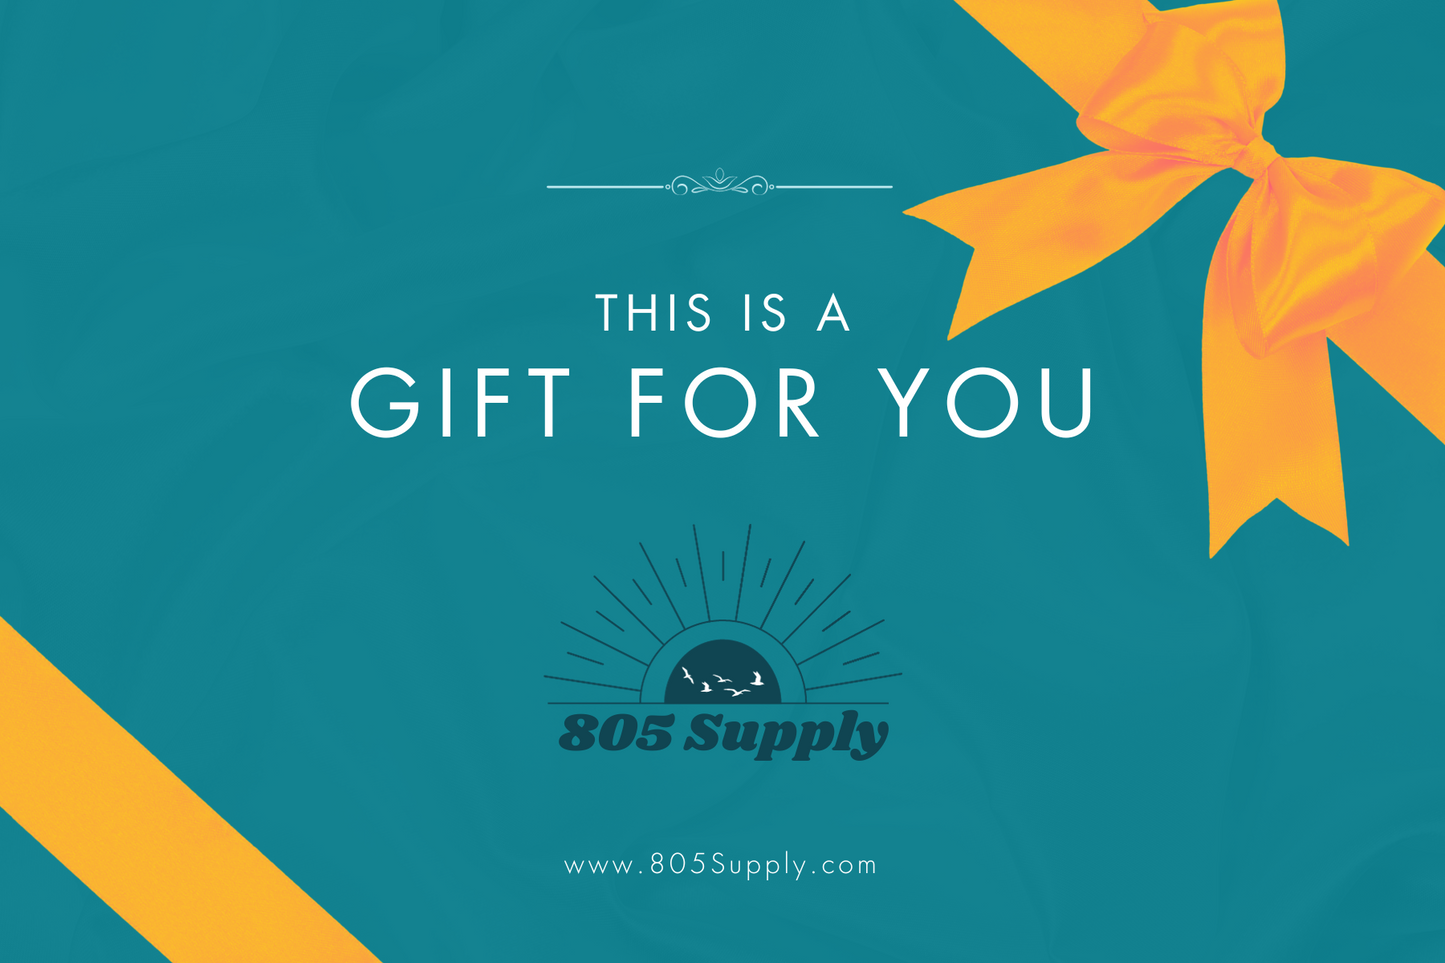 805 Supply Gift Card - 50